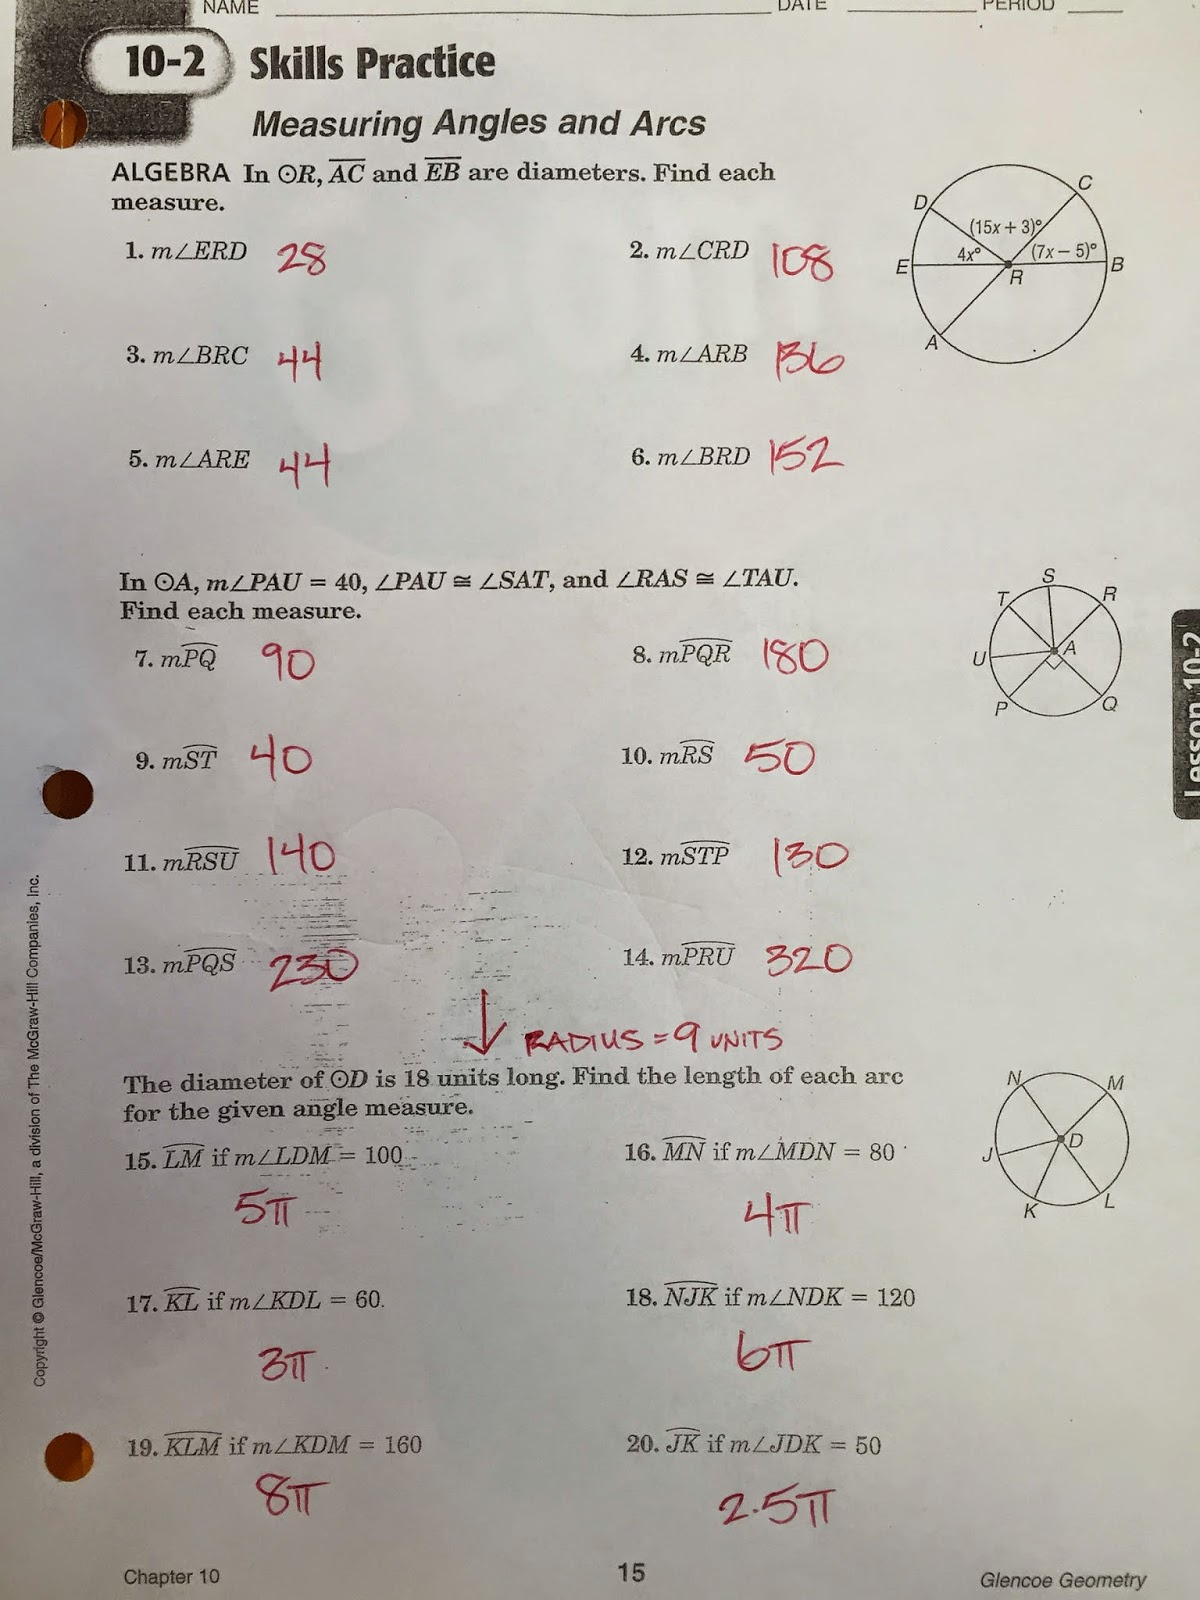 10 1 Skills Practice Measuring Angles And Arcs Worksheet Answers